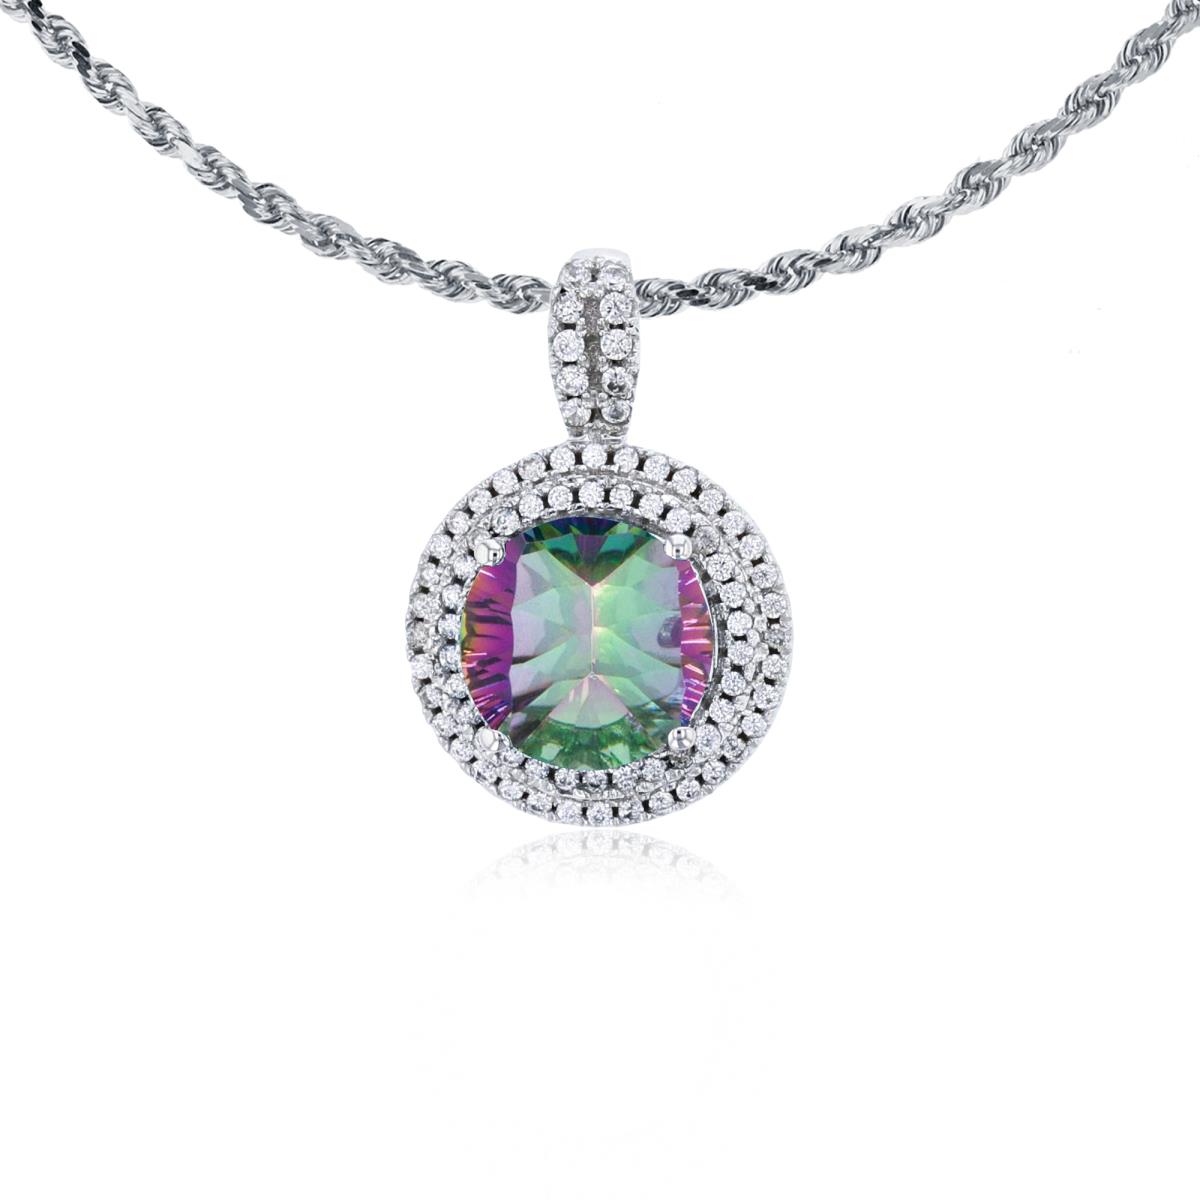 10K White Gold 7mm Round Mystic Green Topaz & 0.25 CTTW Diamonds Double Halo 18" Rope Chain Necklace